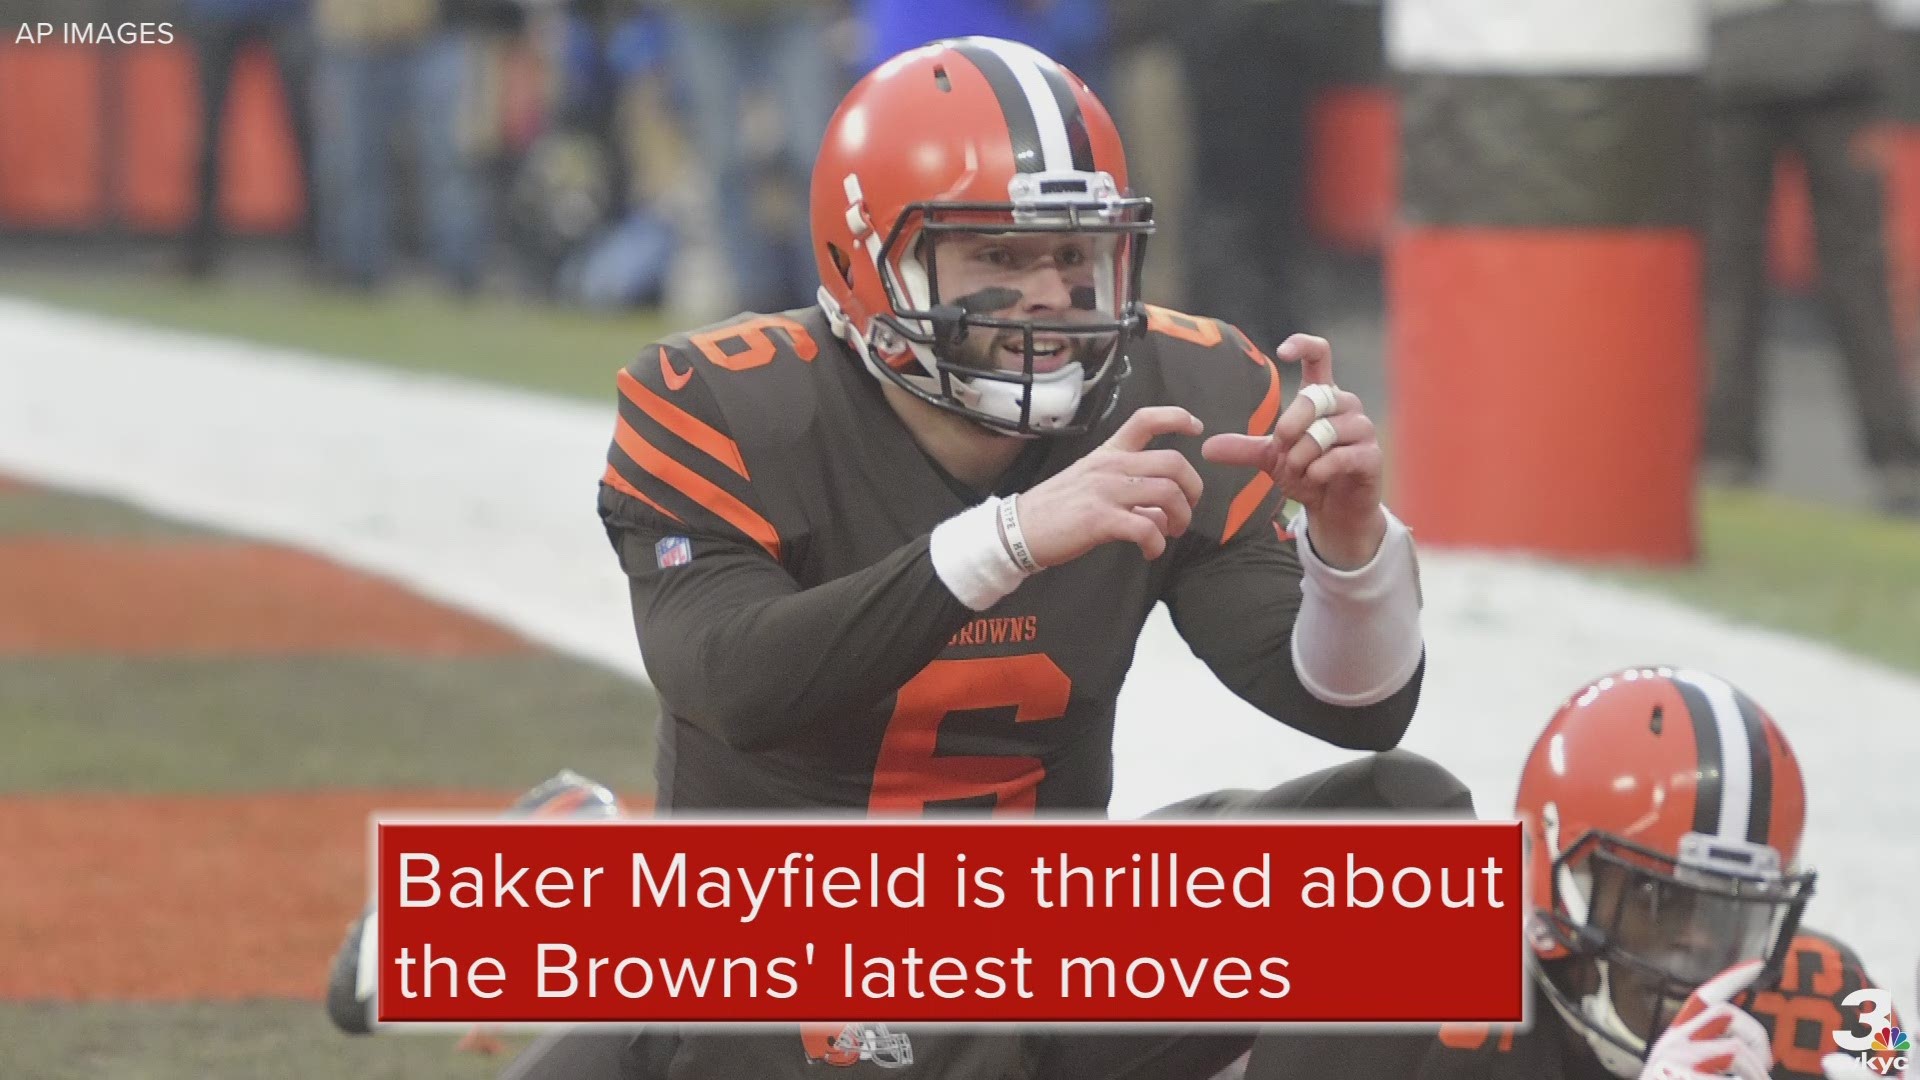 During a visit to the Milwaukee Brewers' Spring Training, Cleveland Browns quarterback Baker Mayfield discussed his team's acquisition of Odell Beckham Jr.